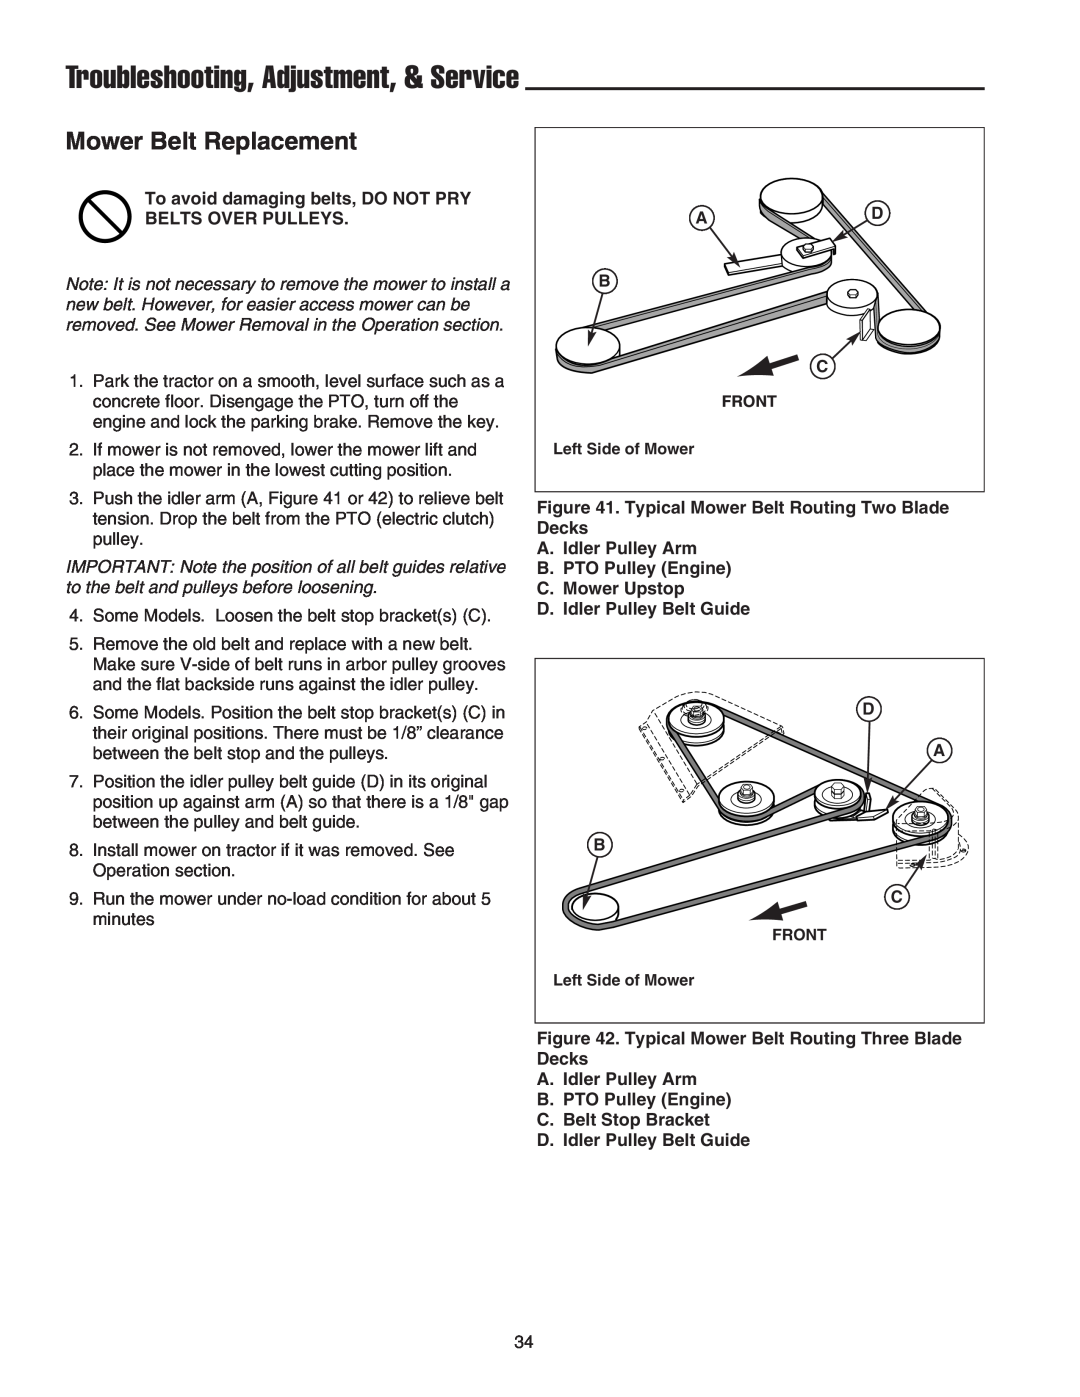 Snapper LT-200 manual Mower Belt Replacement, Troubleshooting, Adjustment, & Service 